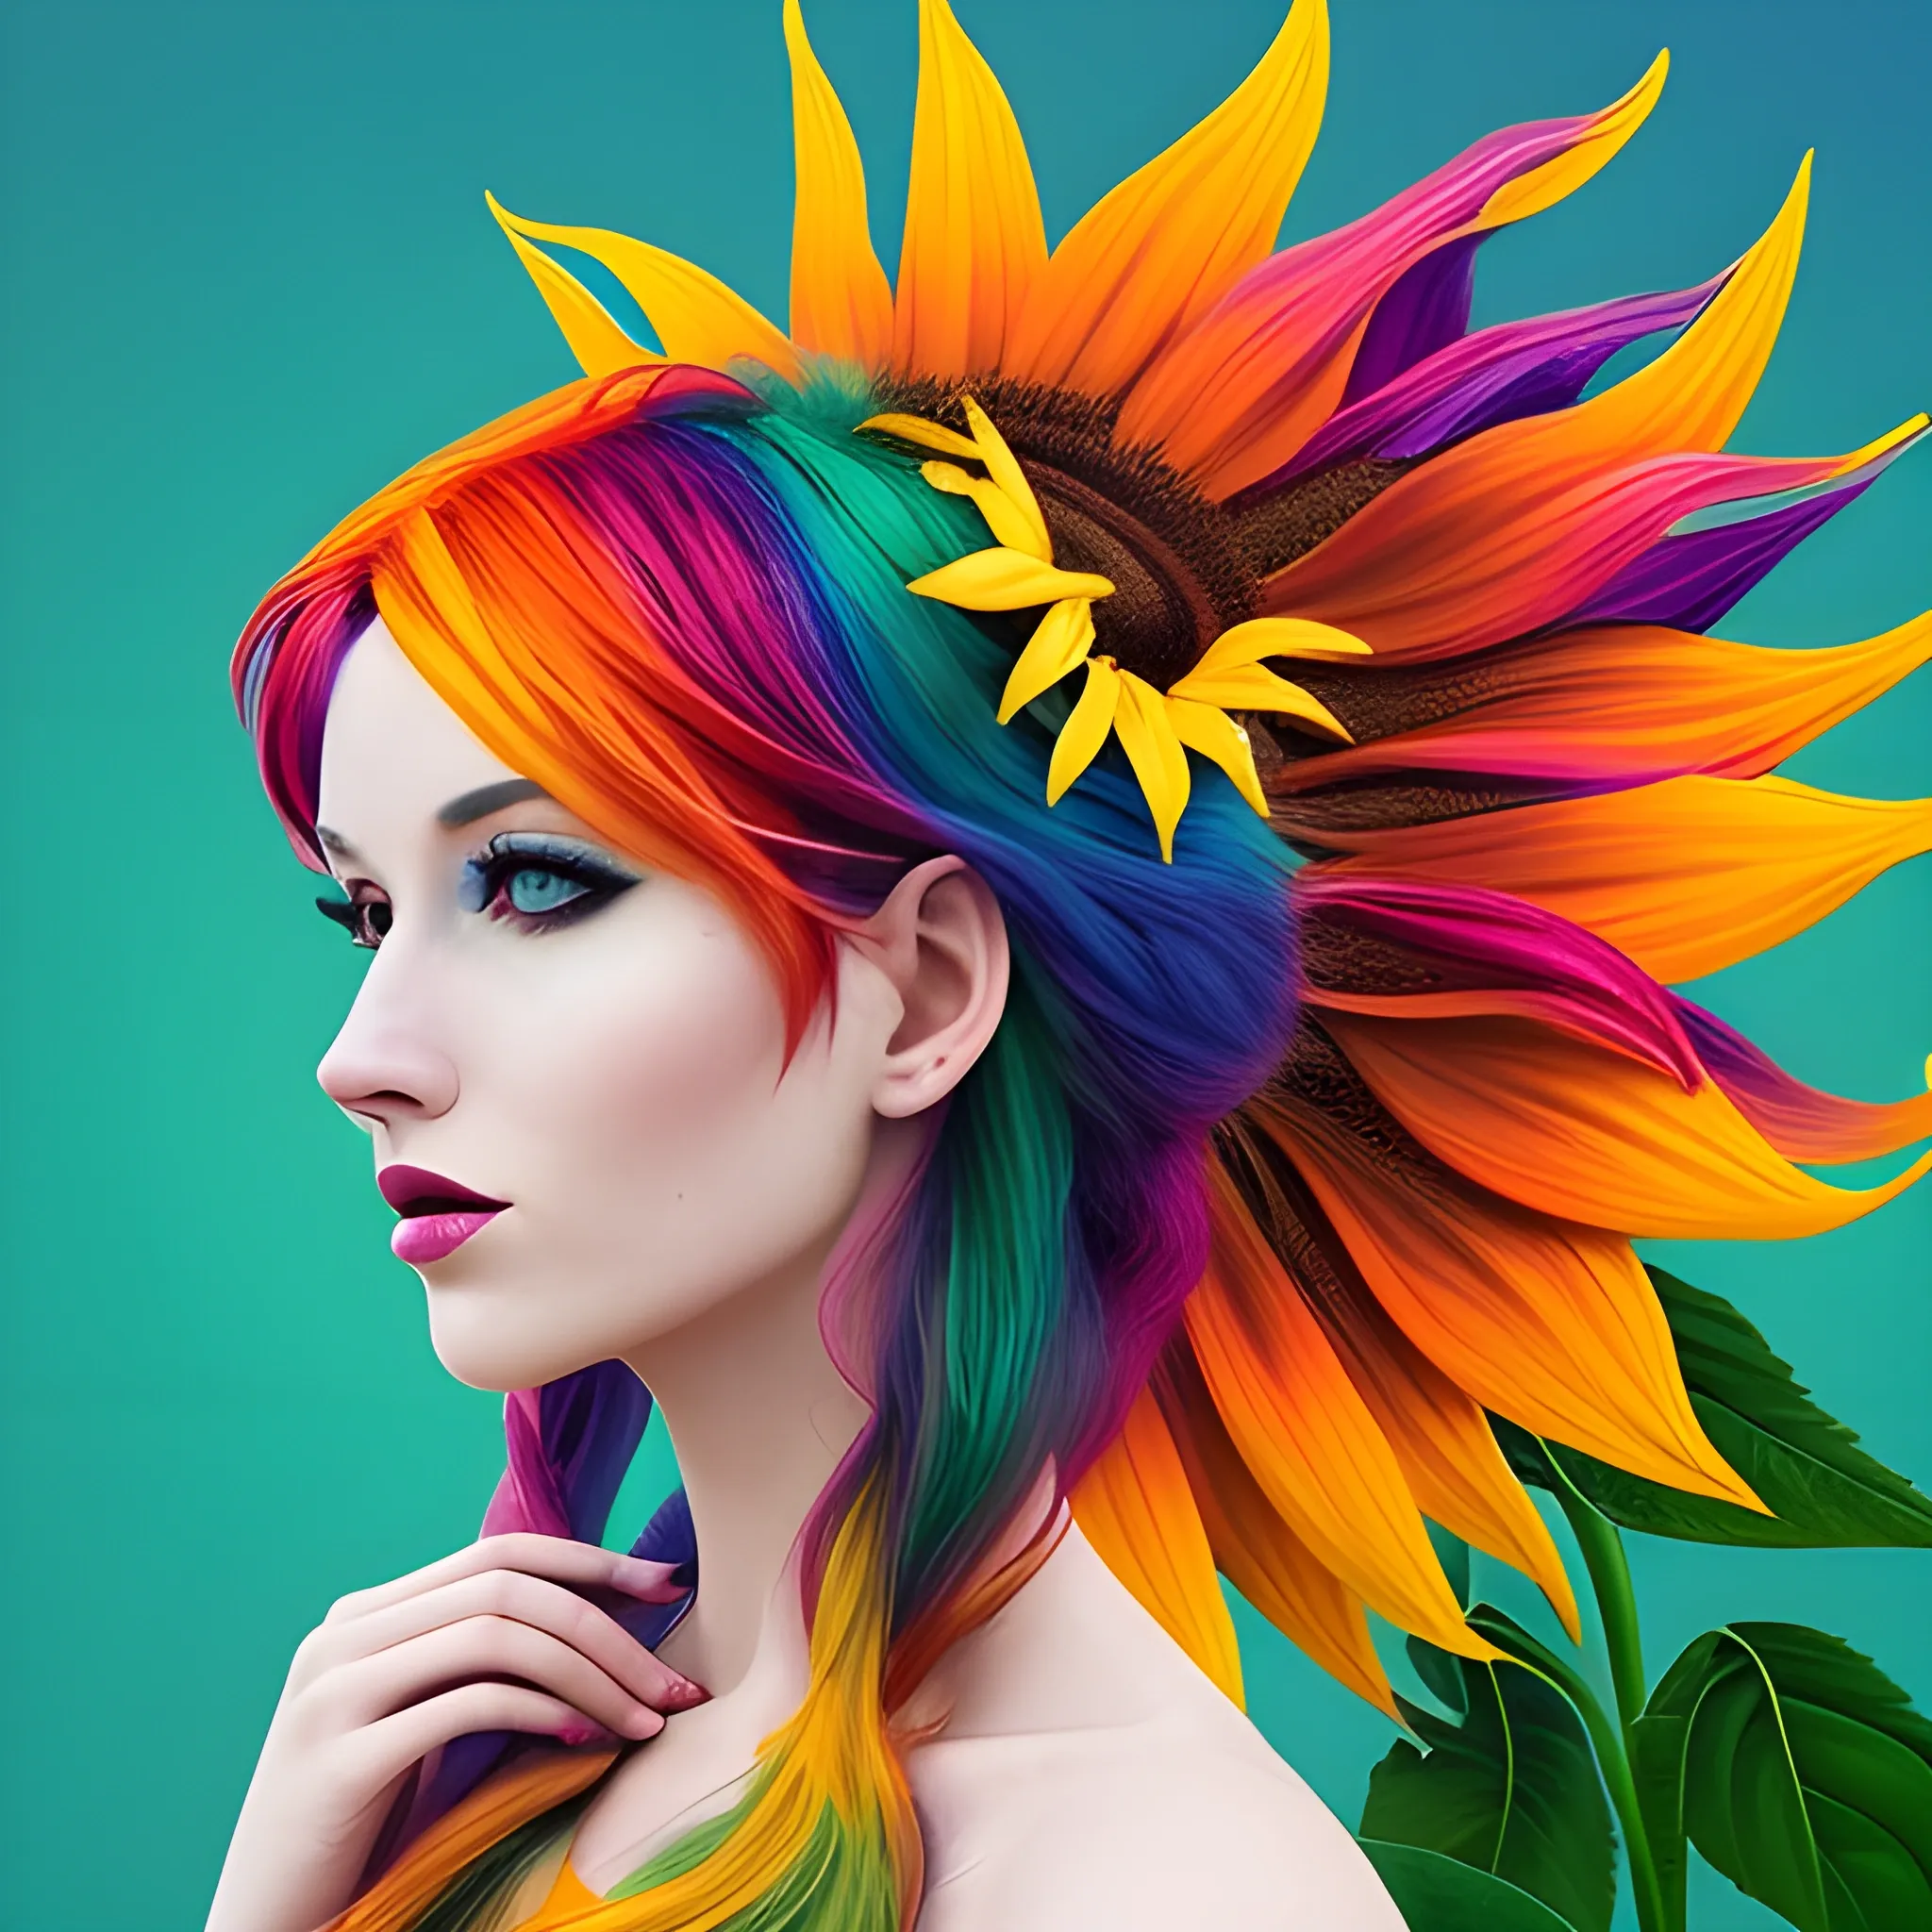 the woman is wearing multicolored hair, vibrant color scheme sun ...